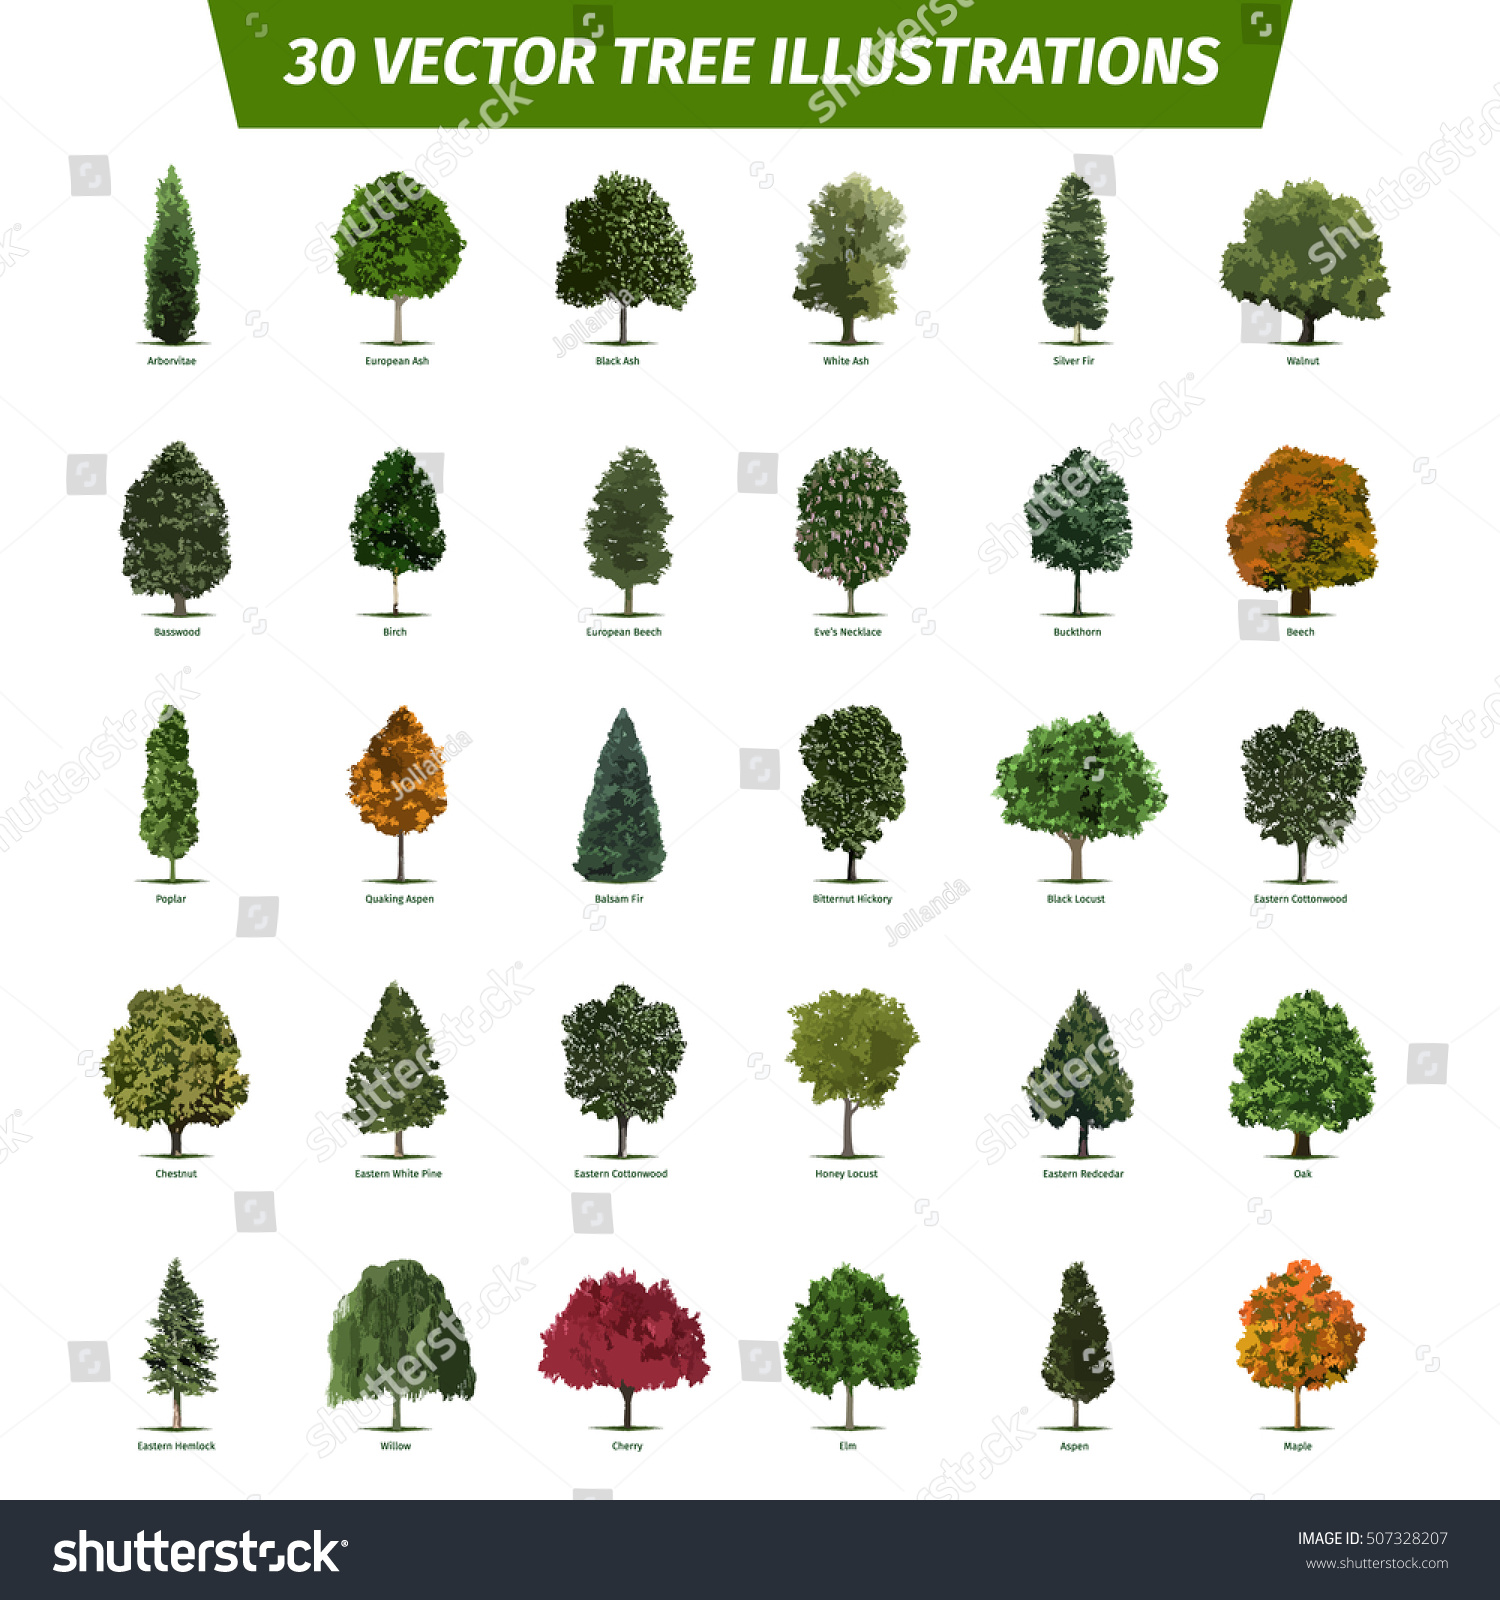 SVG of Thirty different tree sorts with names. Illustrated tree types and specimens. Ash, fir, oak, walnut, chestnut, cherry, apple tree, maple, pine, larch, birch, spruce, willow, walnut, aspen & other. svg